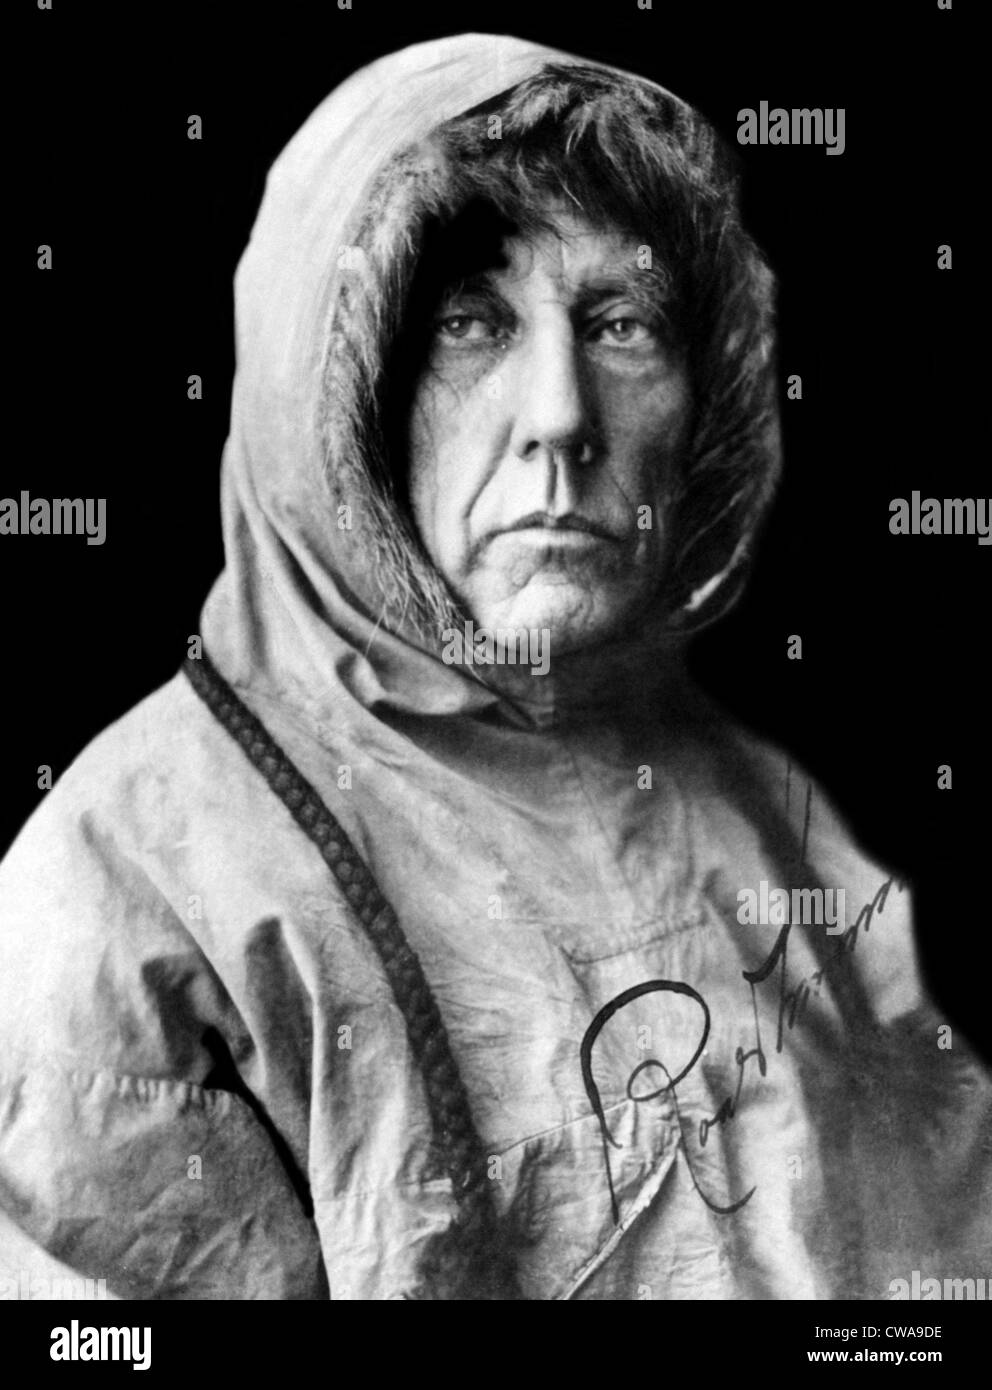 Roald Amundsen, the first person to reach the South Pole. The Norwegian explorer made it there in 1911. Photo taken in 1925. Stock Photo